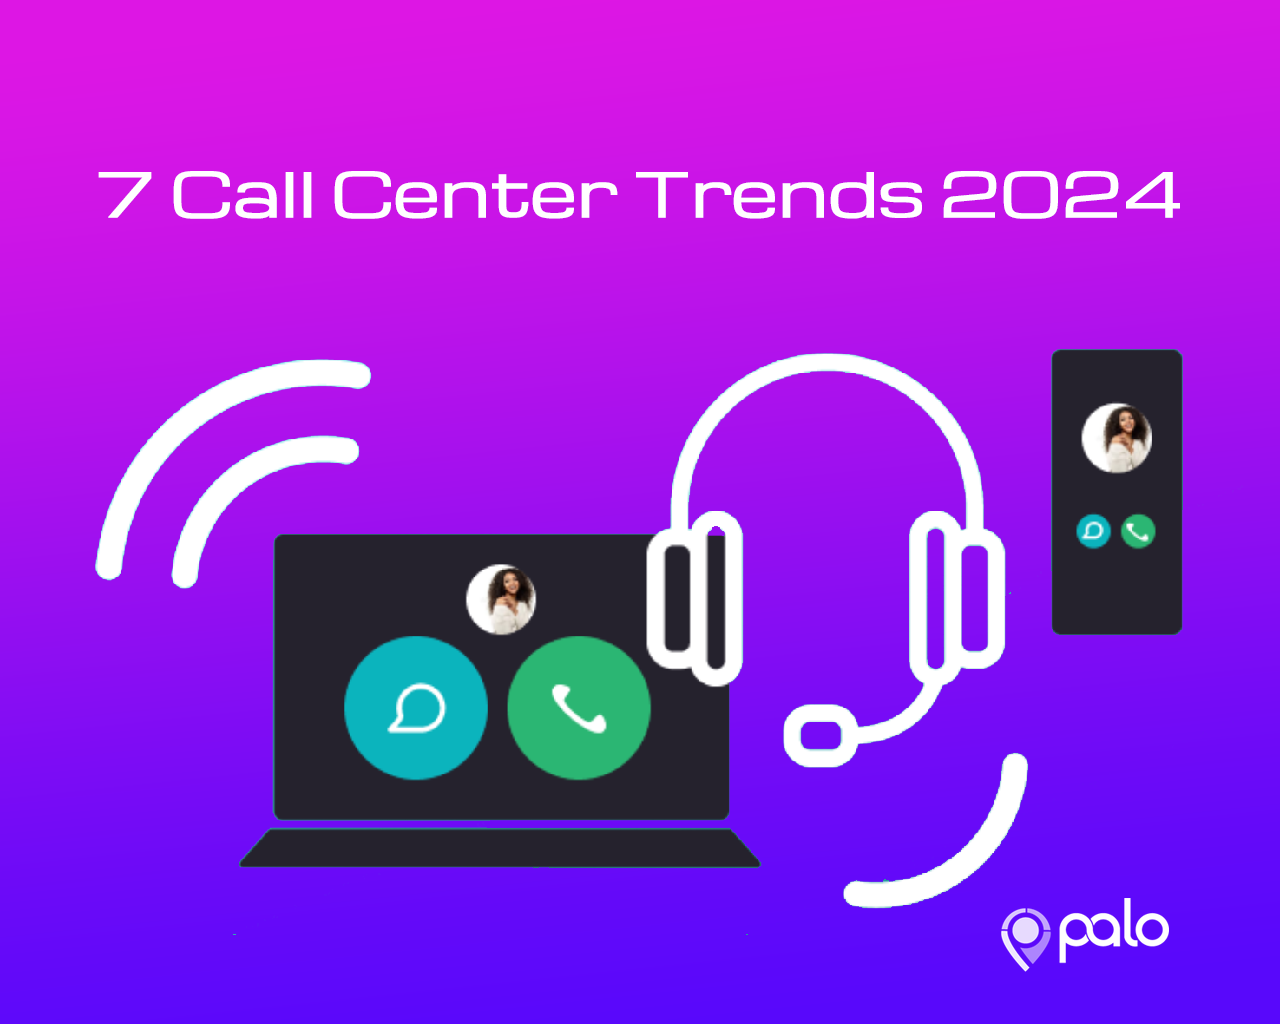 Call Center Trends for 2024